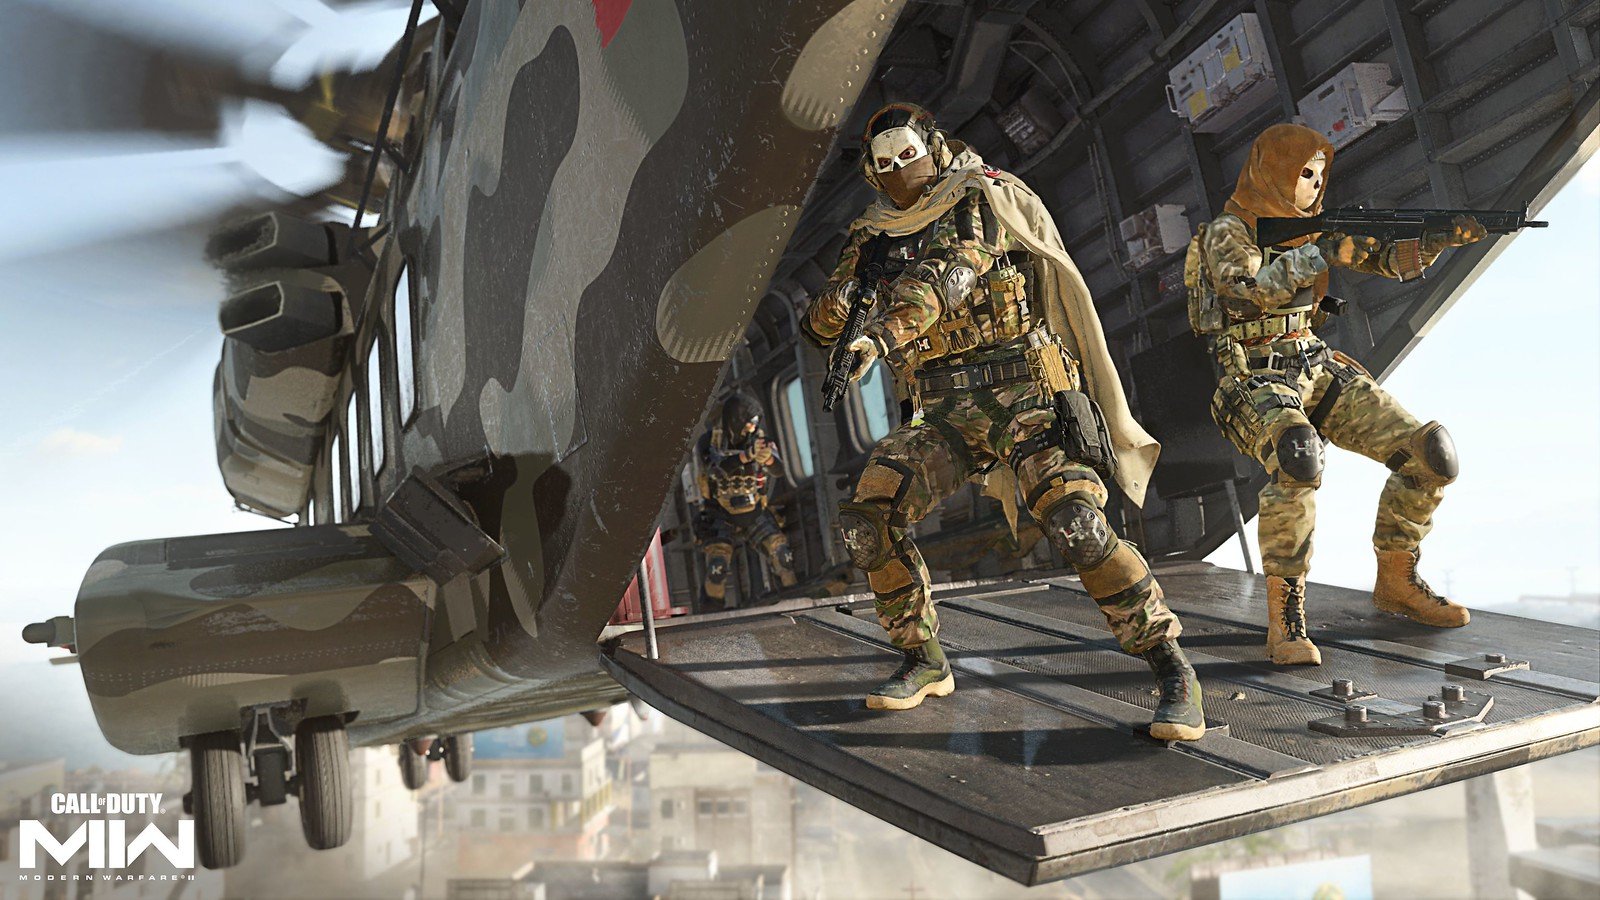 The opening weekend of Call of Duty: Modern Warfare 2's beta has